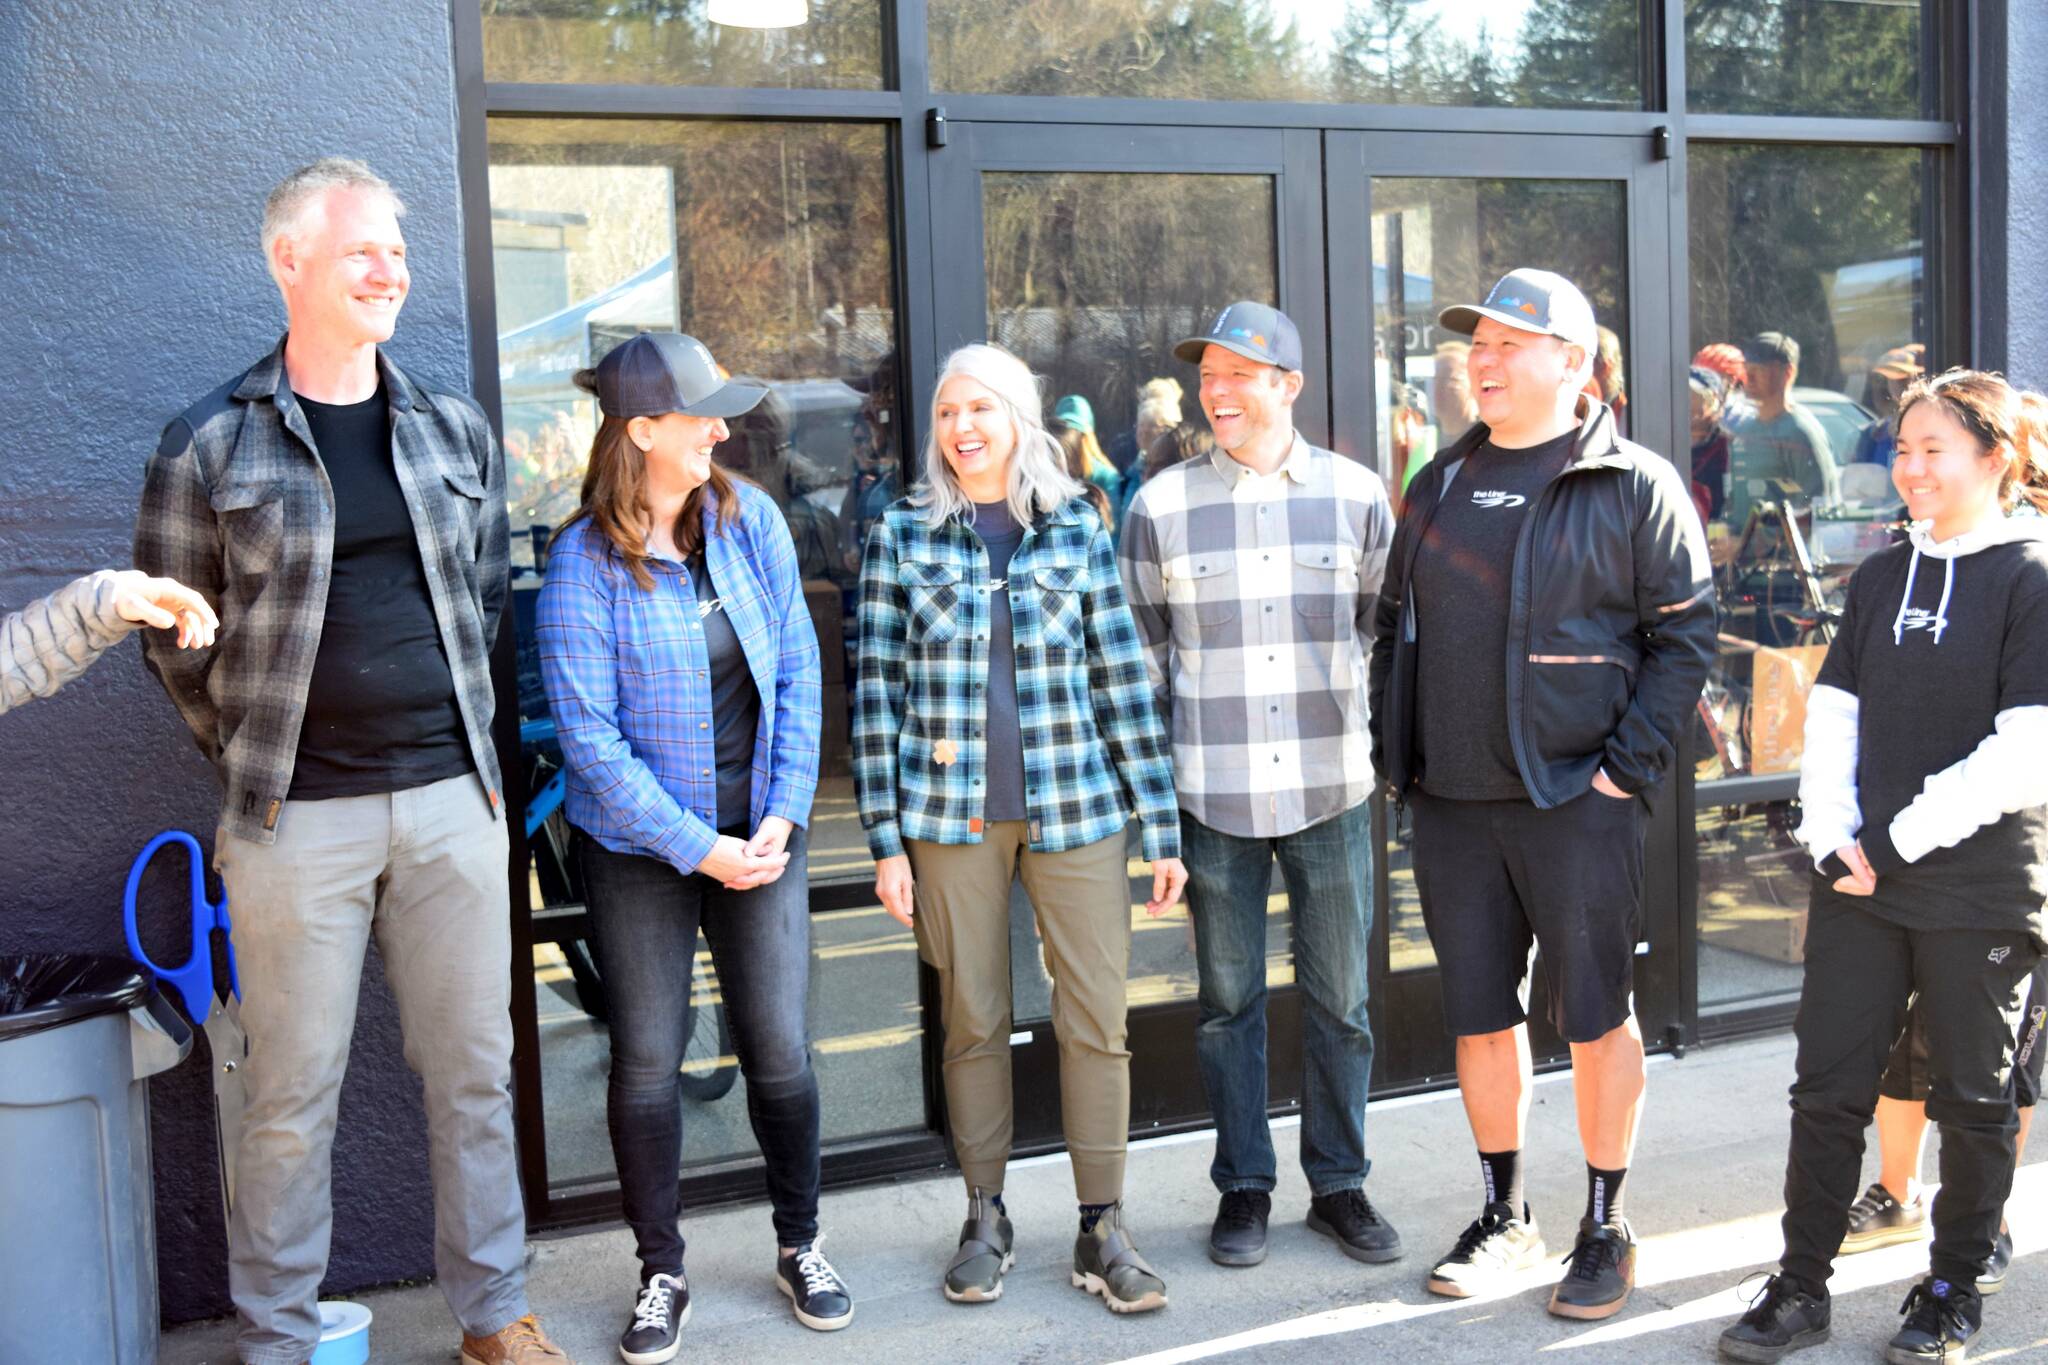 Owners of The Line Bike Experience at their grand opening on March 18. From left: Michael Kunz, Alex Kunz, Sheryl Tullis, James Skinner and Steve Murakami. Photo Conor Wilson/Valley Record.